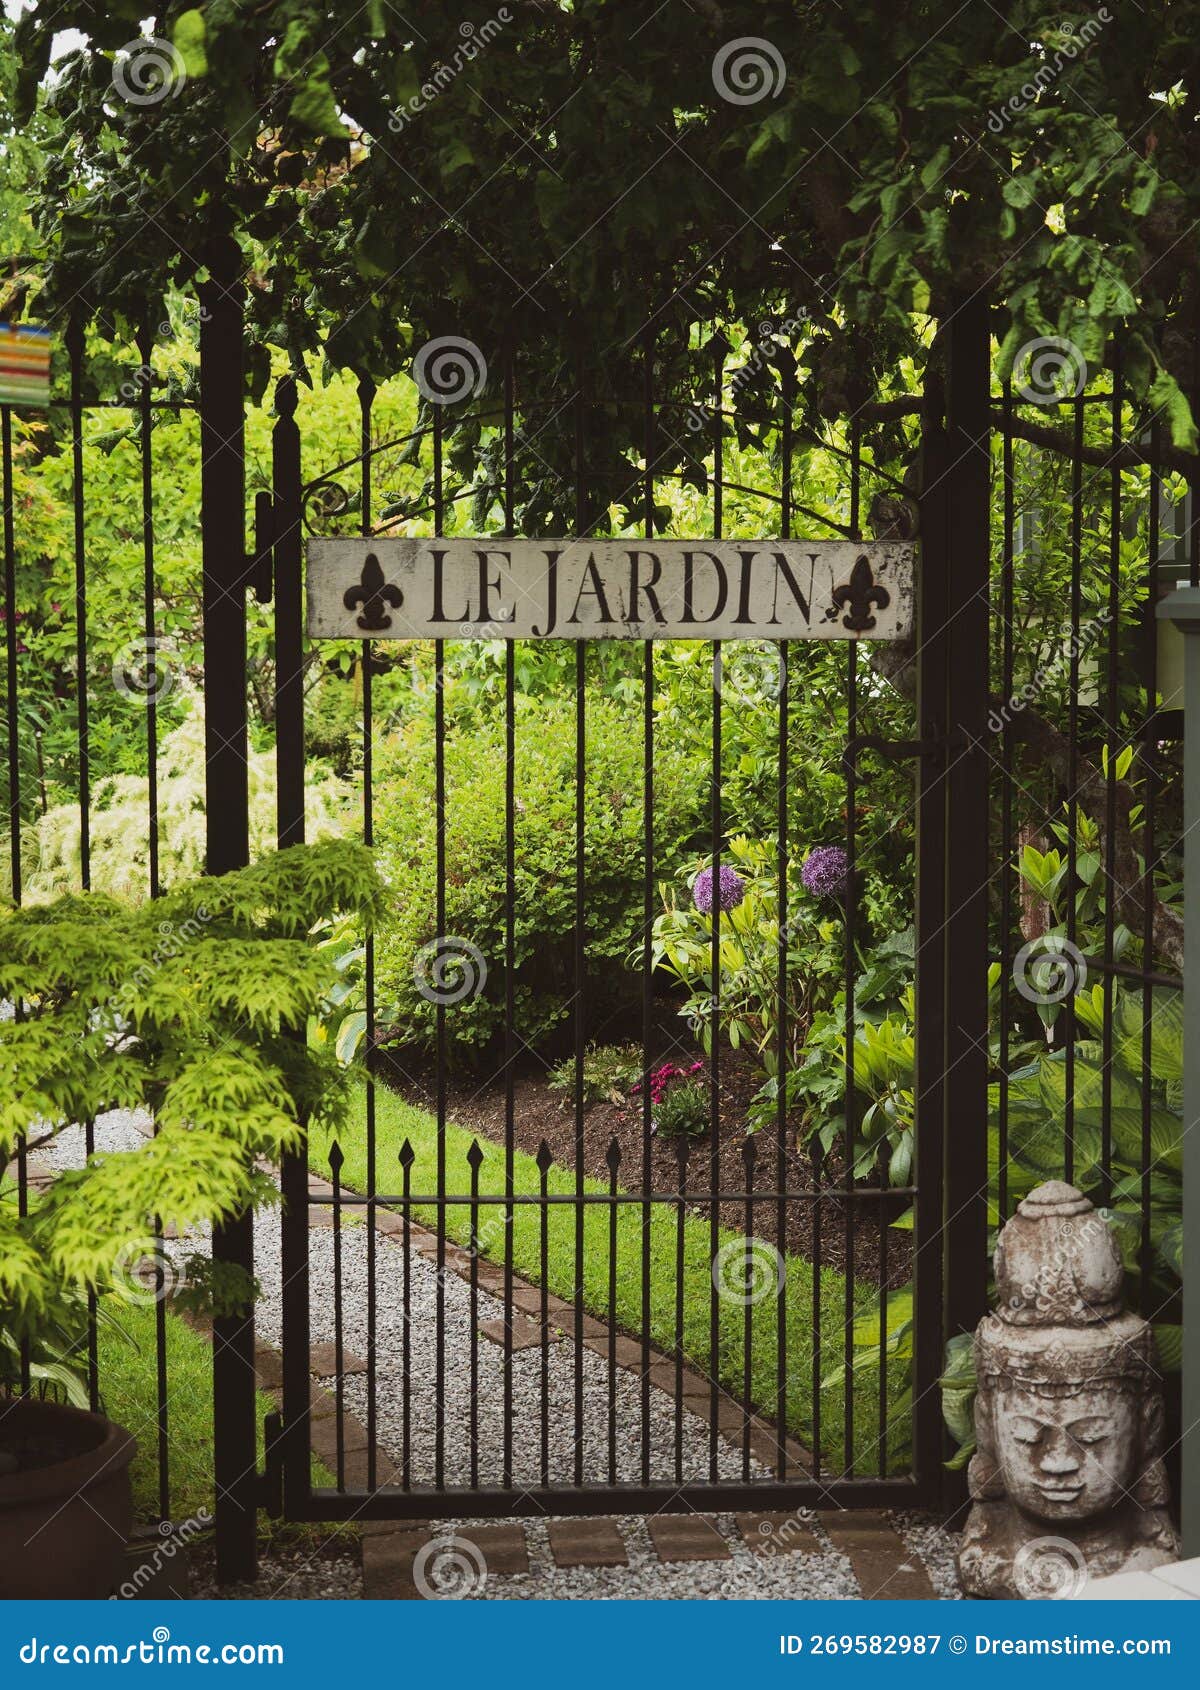 vertical shot of a metal gate with the french words 'le jardin' - translation: the garden